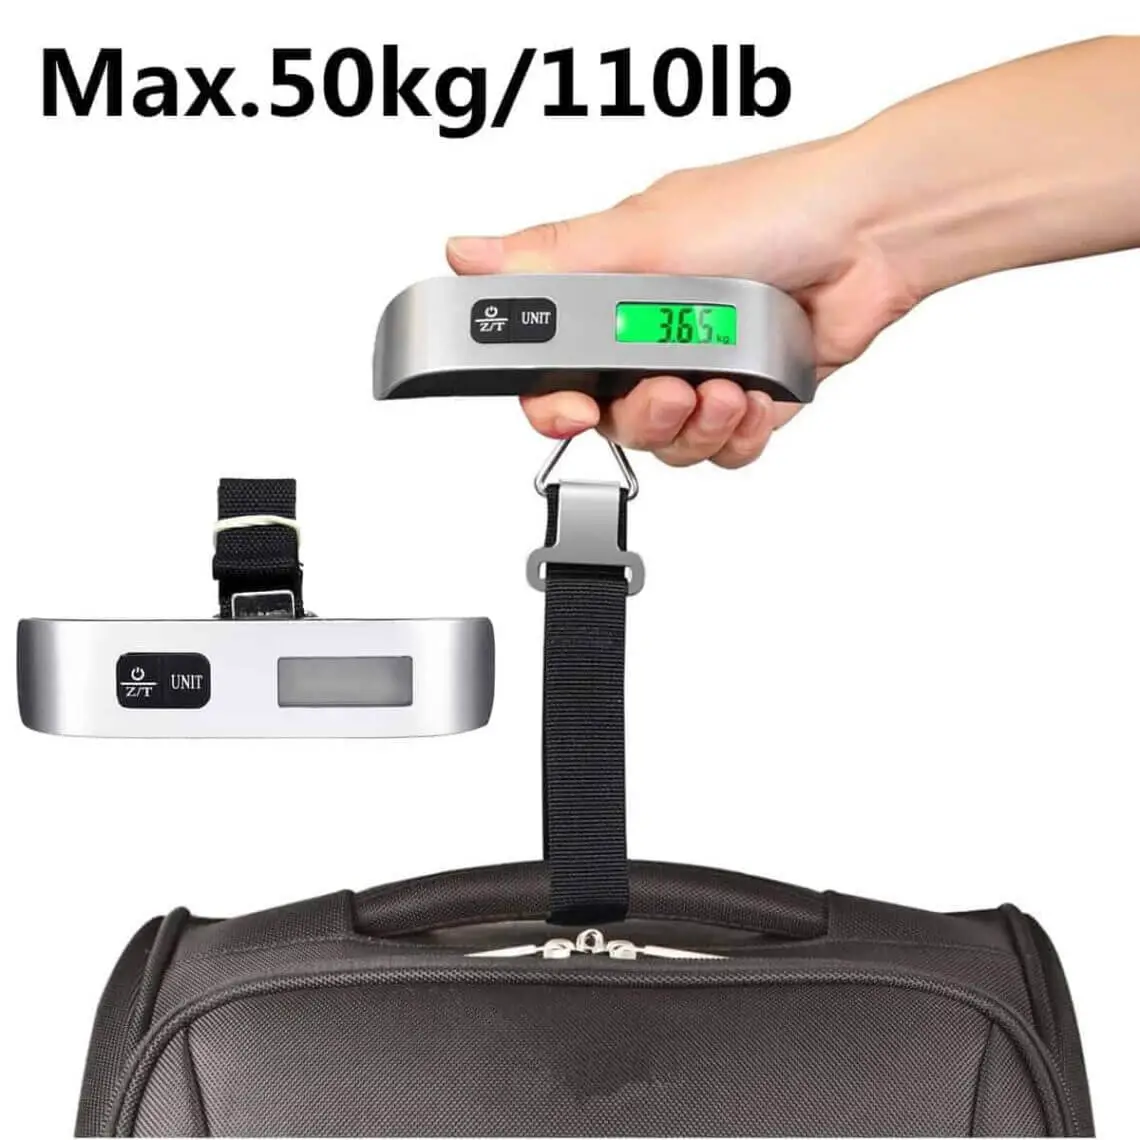 Luggage Scale Portable Digital Handging Baggage Scale for Travel Suitcase Weight Scale with Rubber Paint Temperature Sensor 110 Pounds Battery Included 